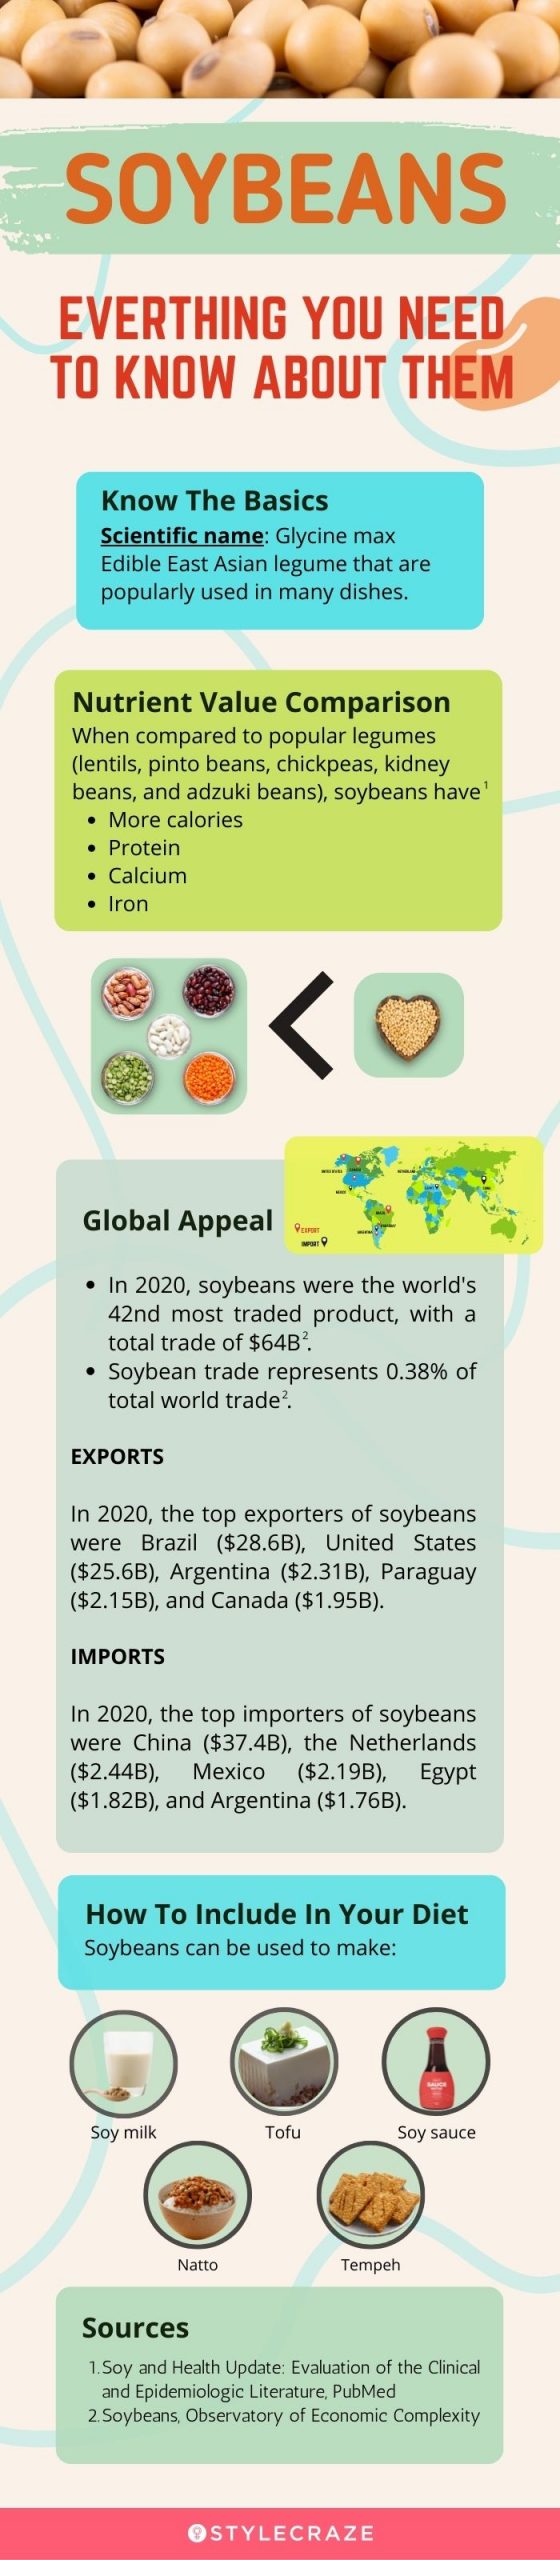 everything you need to know about soybeans (infographic)